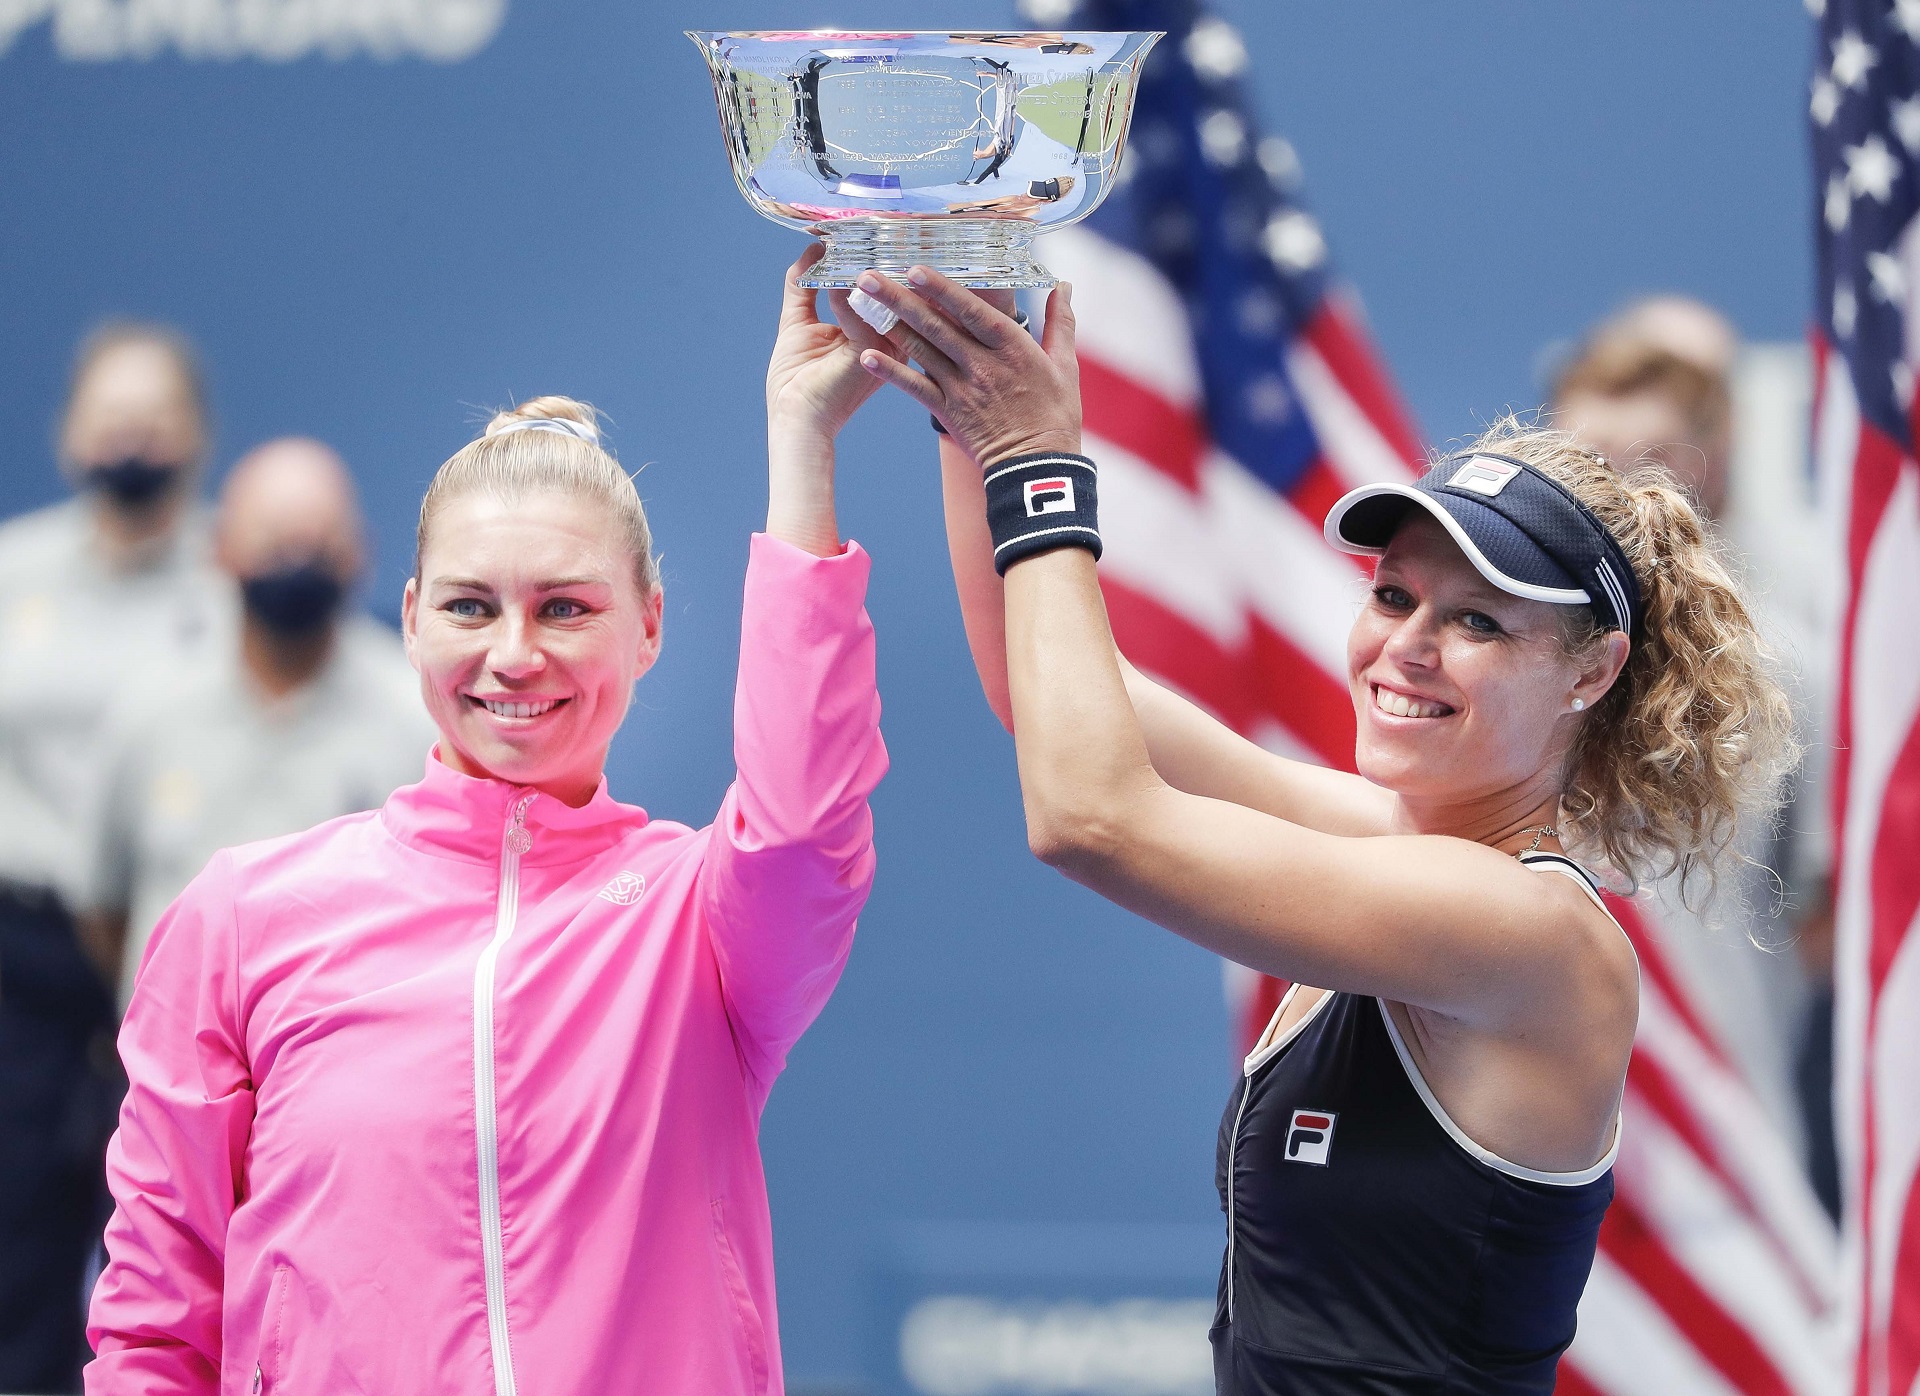 epa08662305 Teammates Vera Zvonareva (L) of Russia and Laura Siegemund of Germany hold their trophy after defeating Nicole Melichar of the US and Yifan Xu of China in the women's doubles final match on the twelfth day of the US Open Tennis Championships the USTA National Tennis Center in Flushing Meadows, New York, USA, 11 September 2020. Due to the coronavirus pandemic, the US Open is being played without fans and runs from 31 August through 13 September.  EPA/JUSTIN LANE